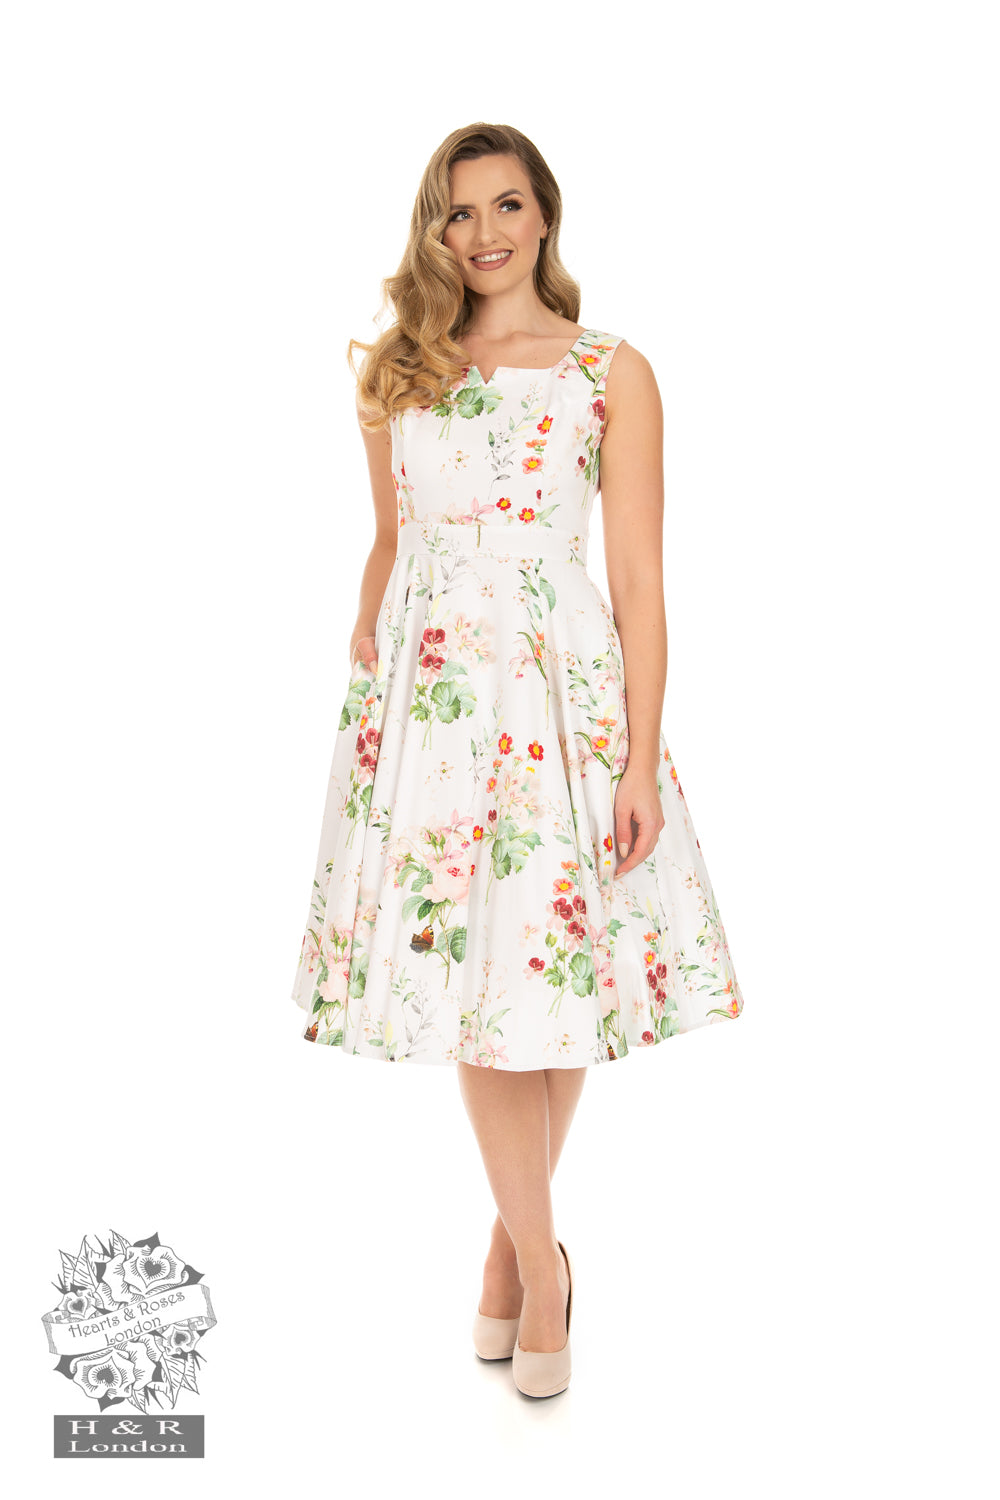 Hearts & Roses 269 Marion Floral Swing Dress - Nichole Jade Rockabilly Boutique